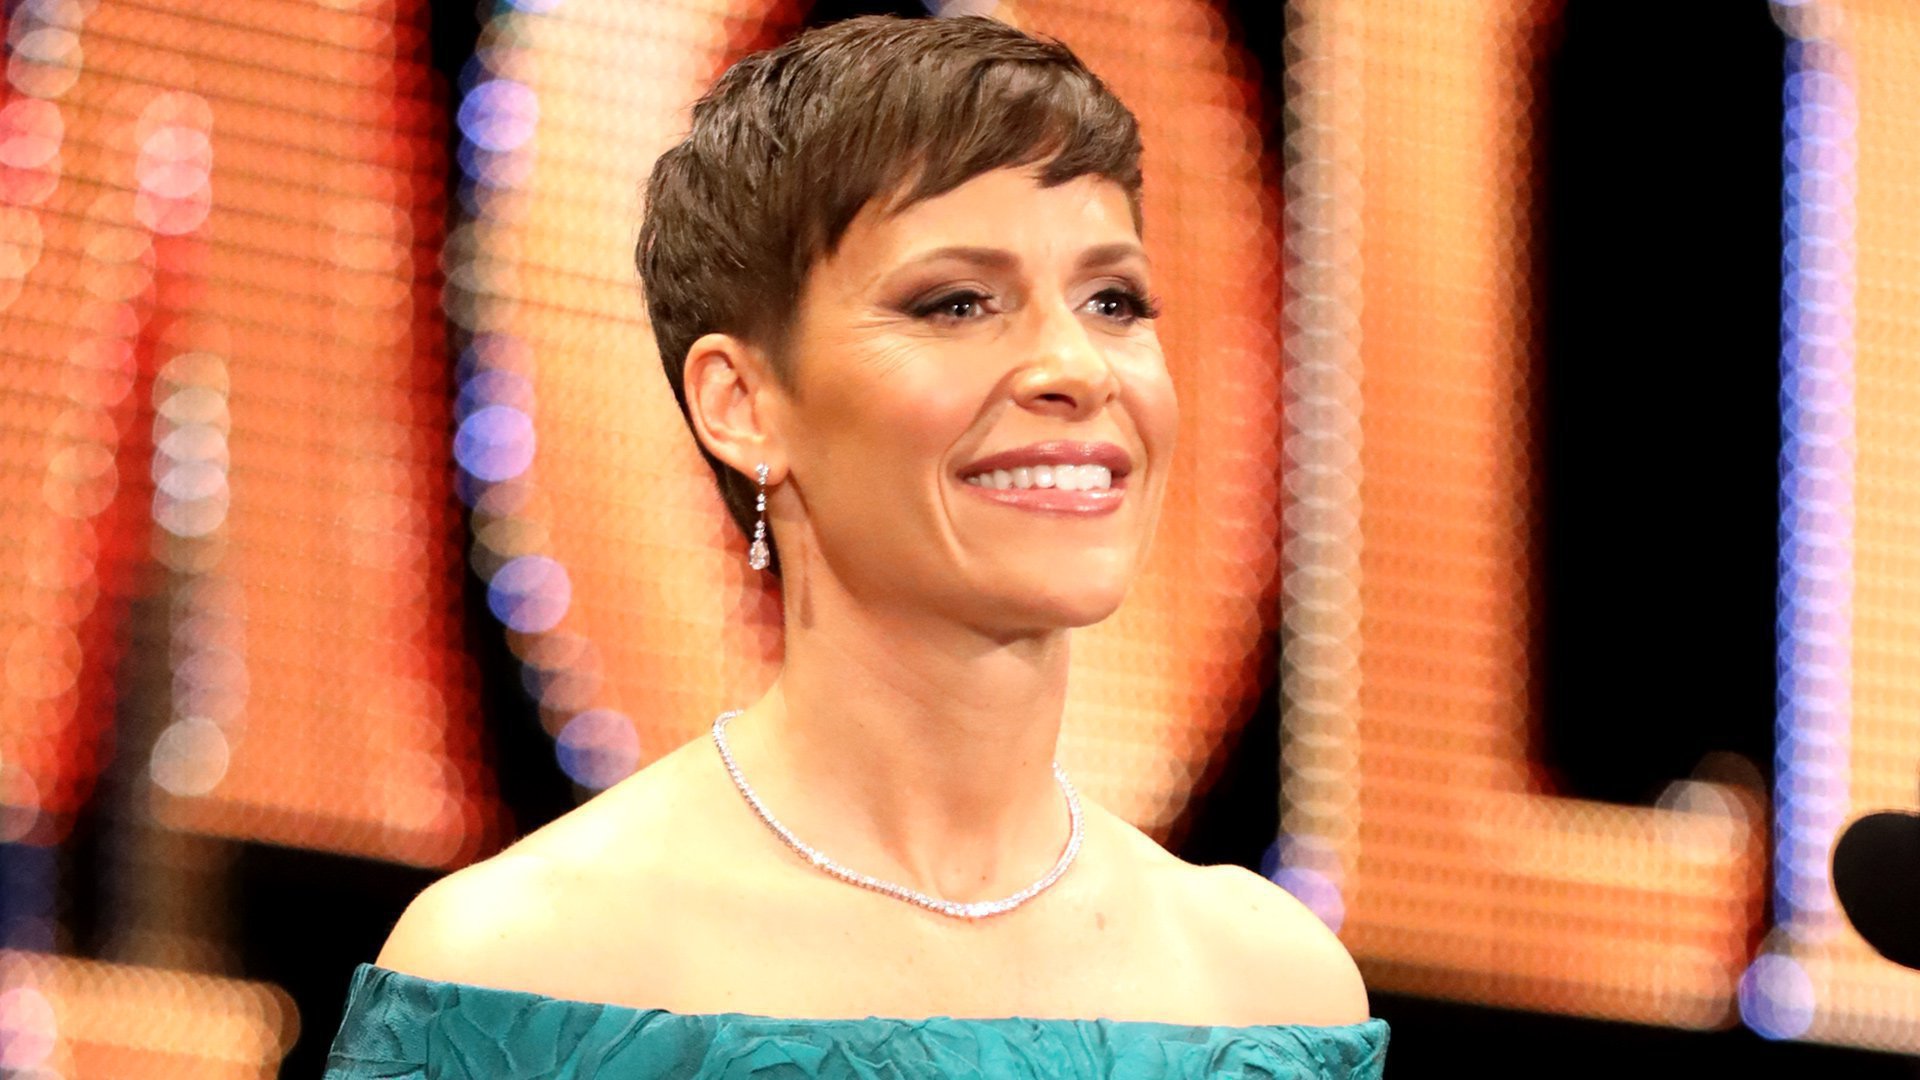 WWE Announces Molly Holly And Road Dogg Appearances For Next Week’s NXT Episode